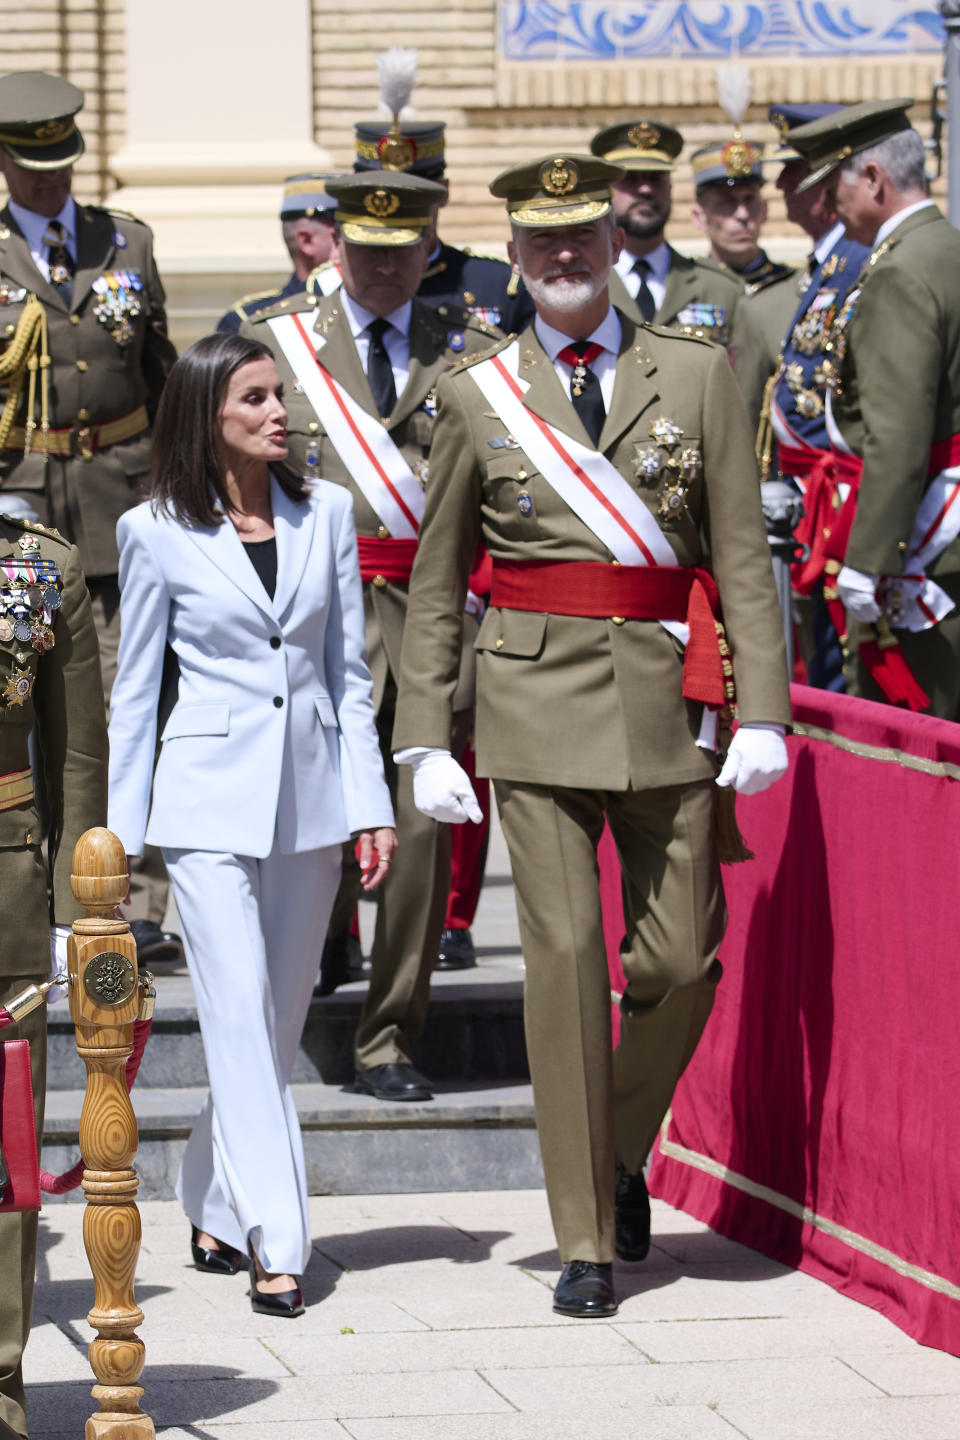 ZARAGOZA, SPAIN - MAY 04: King Felipe VI of Spain and Queen Letizia of Spain attend the 40th anniversary of the Flag Oath of the 44th promotion of the General Military Academy on May 04, 2024 in Zaragoza, Spain. (Photo by Carlos Alvarez/Getty Images)